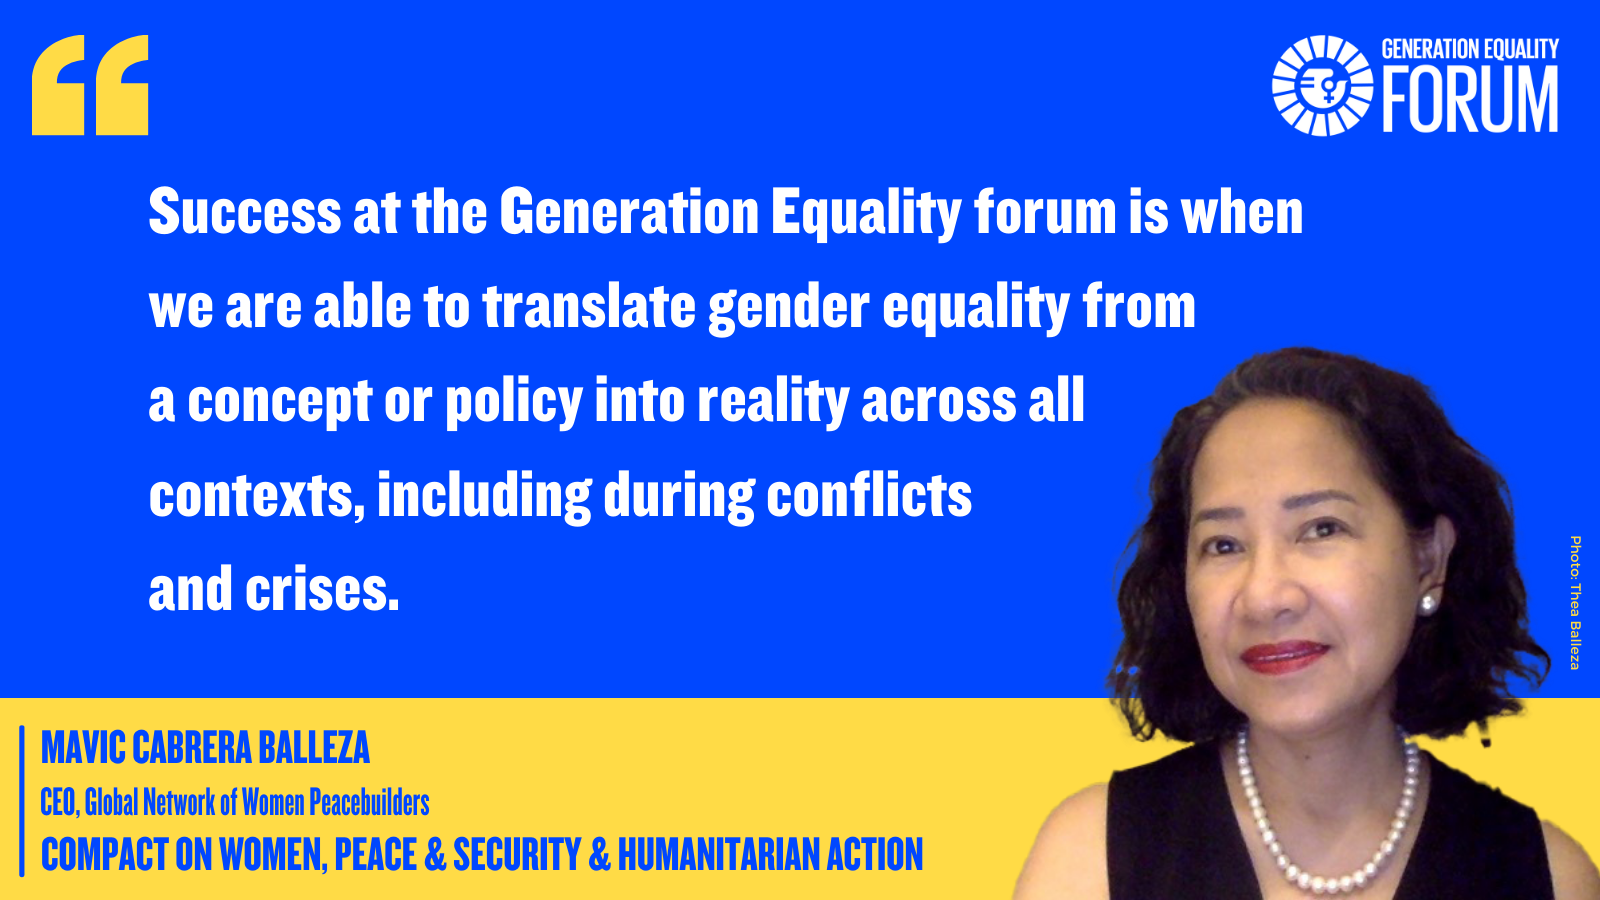 "Success at the Generation Equality forum is when we are able to translate gender equality from a concept of policy into reality across all contexts, including during conflicts and crisis." - Mavic Belleza